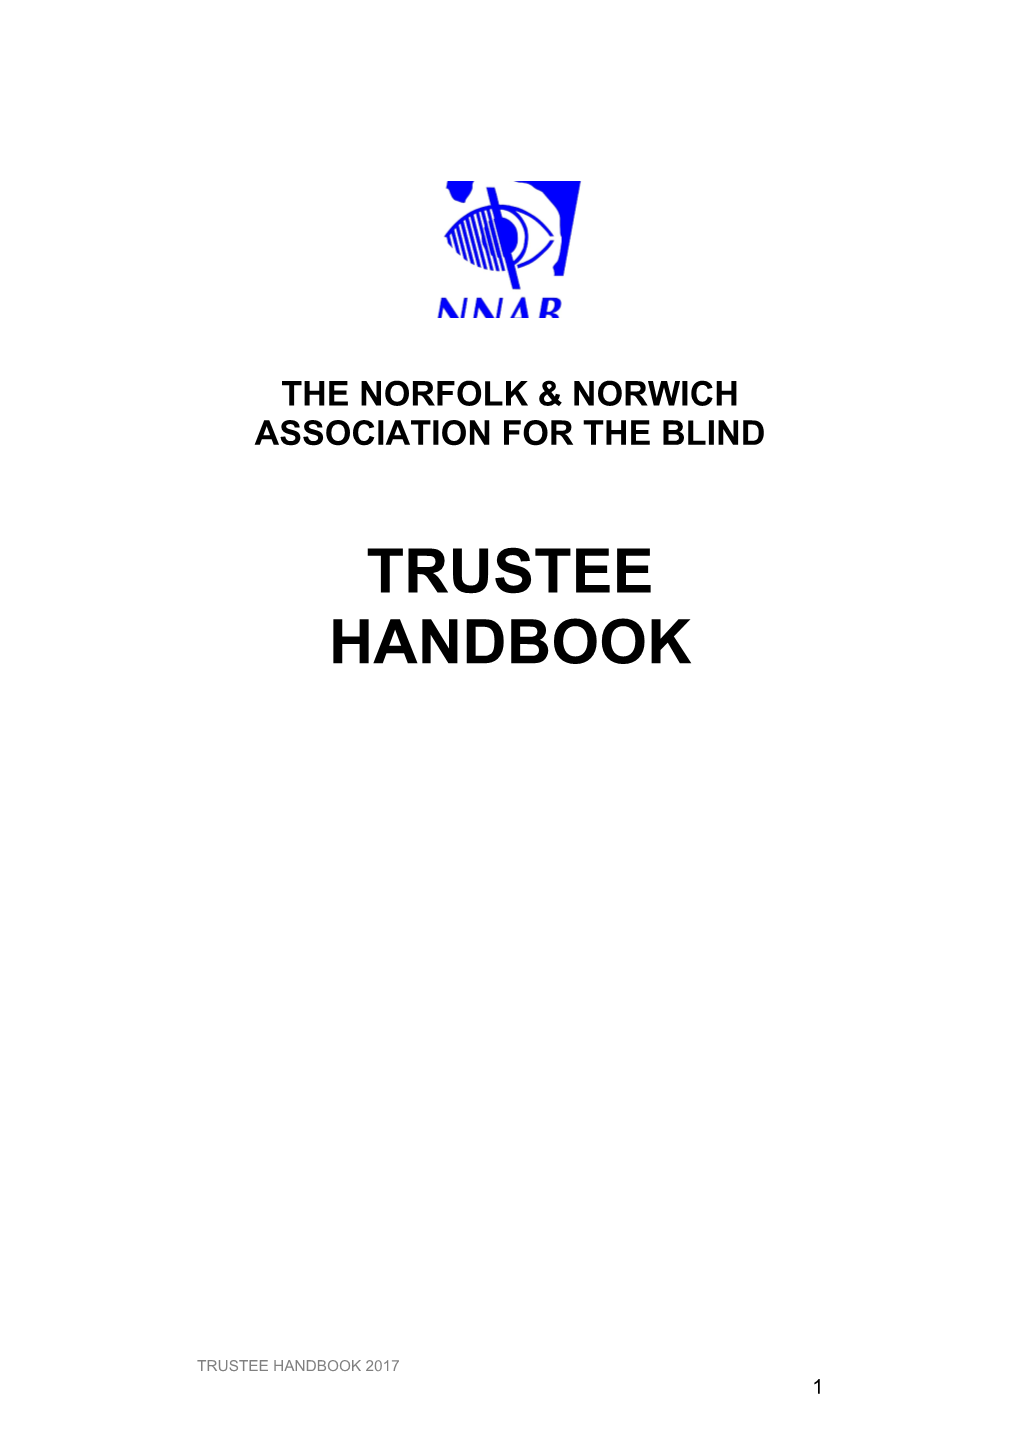 The Norfolk & Norwich Association for the Blind